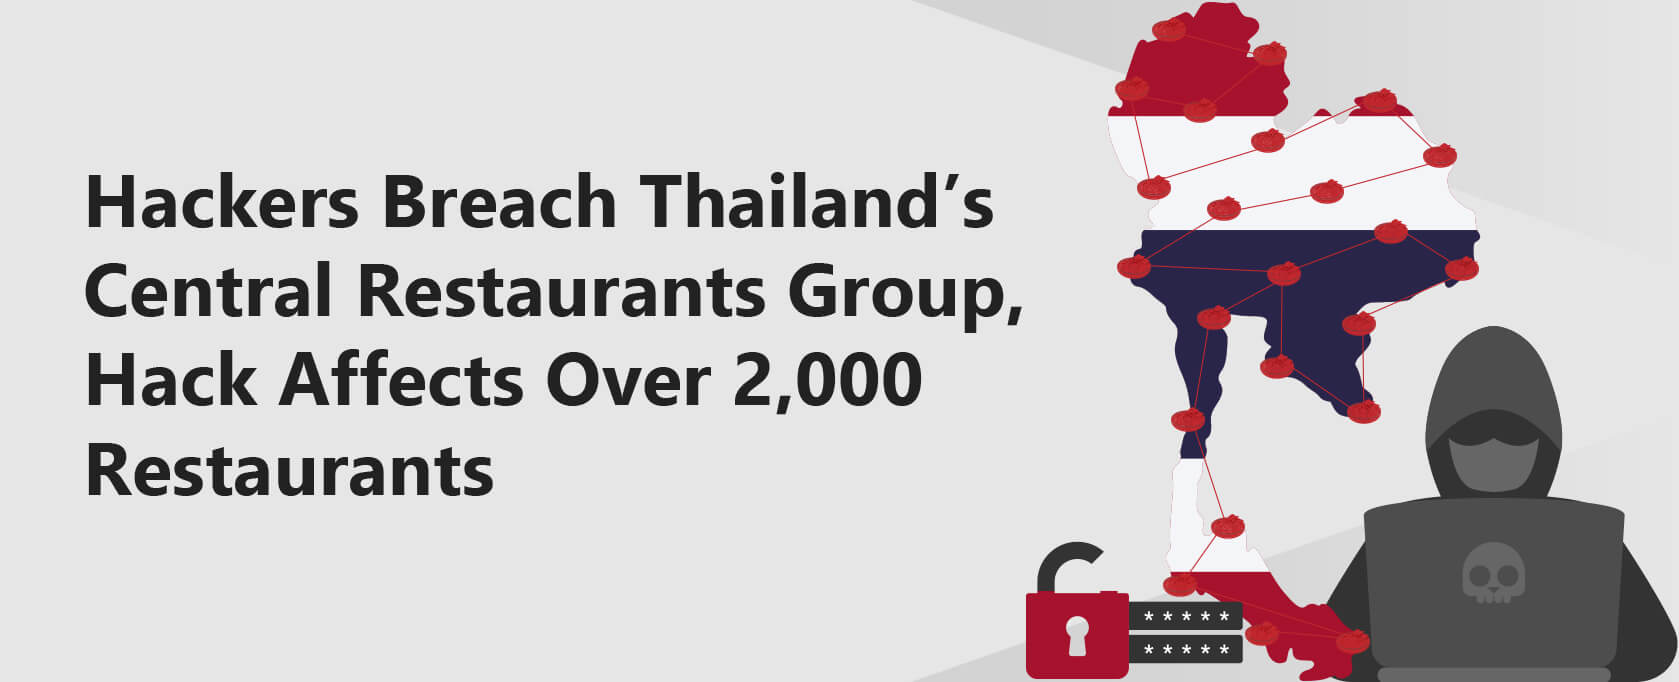 Hackers Breach Thailand’s Central Restaurants Group, Hack Affects Over 2,000 Restaurants